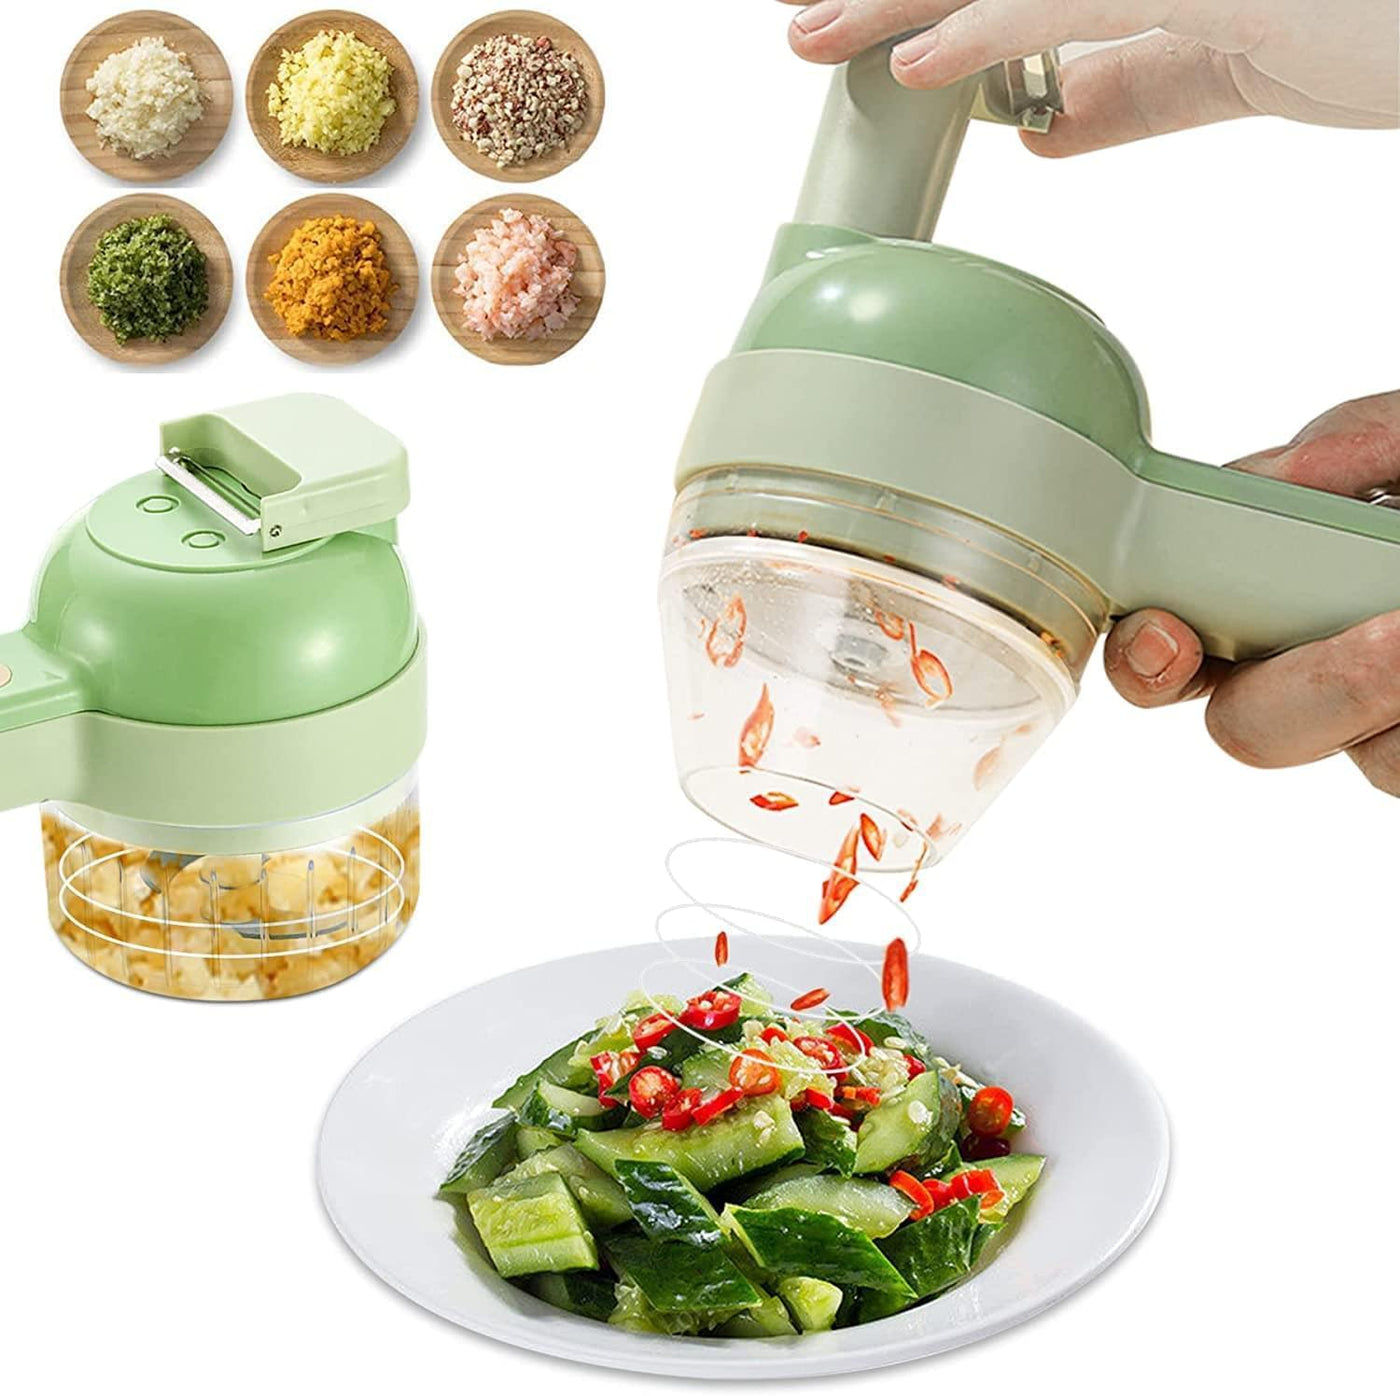 4 IN 1 Handheld Electric Vegetable Cutter